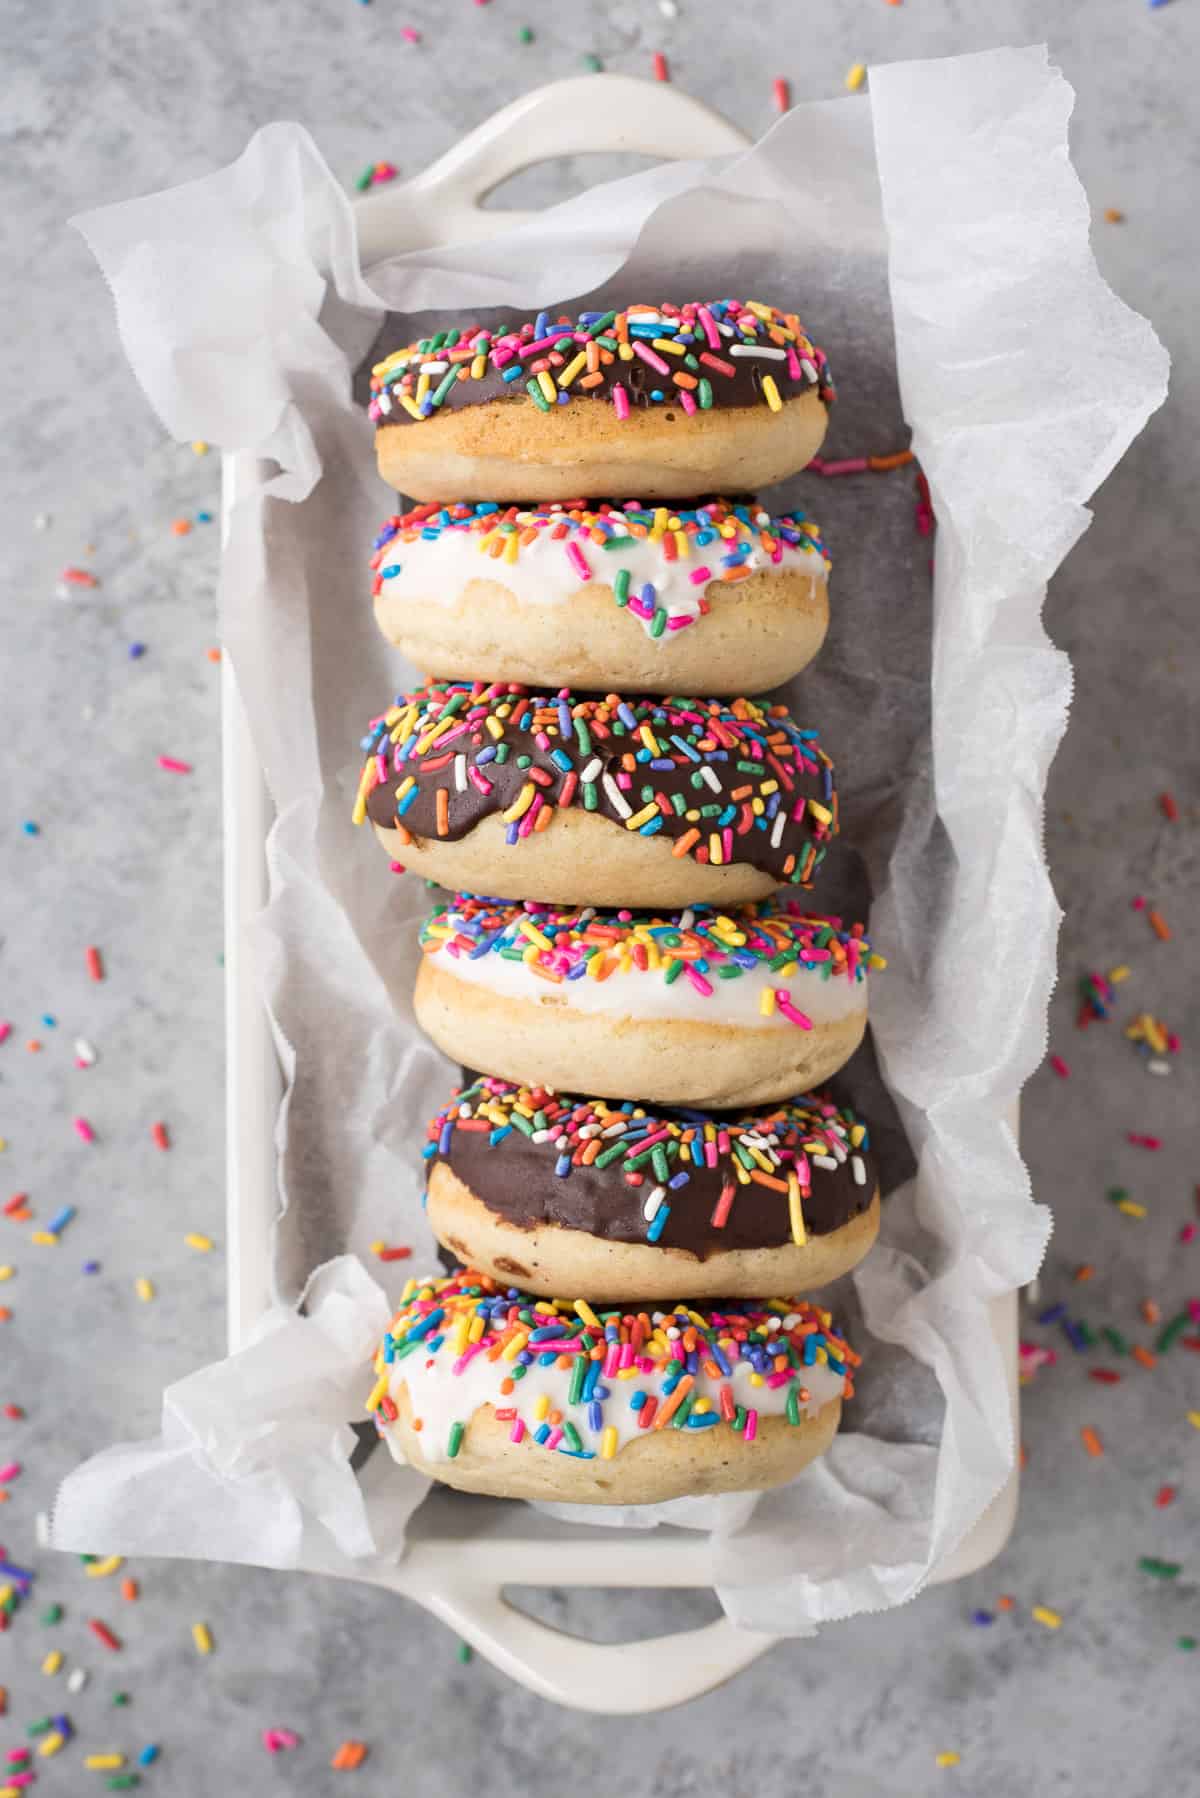 6 donuts with chocolate and white chocolate glaze with rainbow sprinkles lined up in white pan